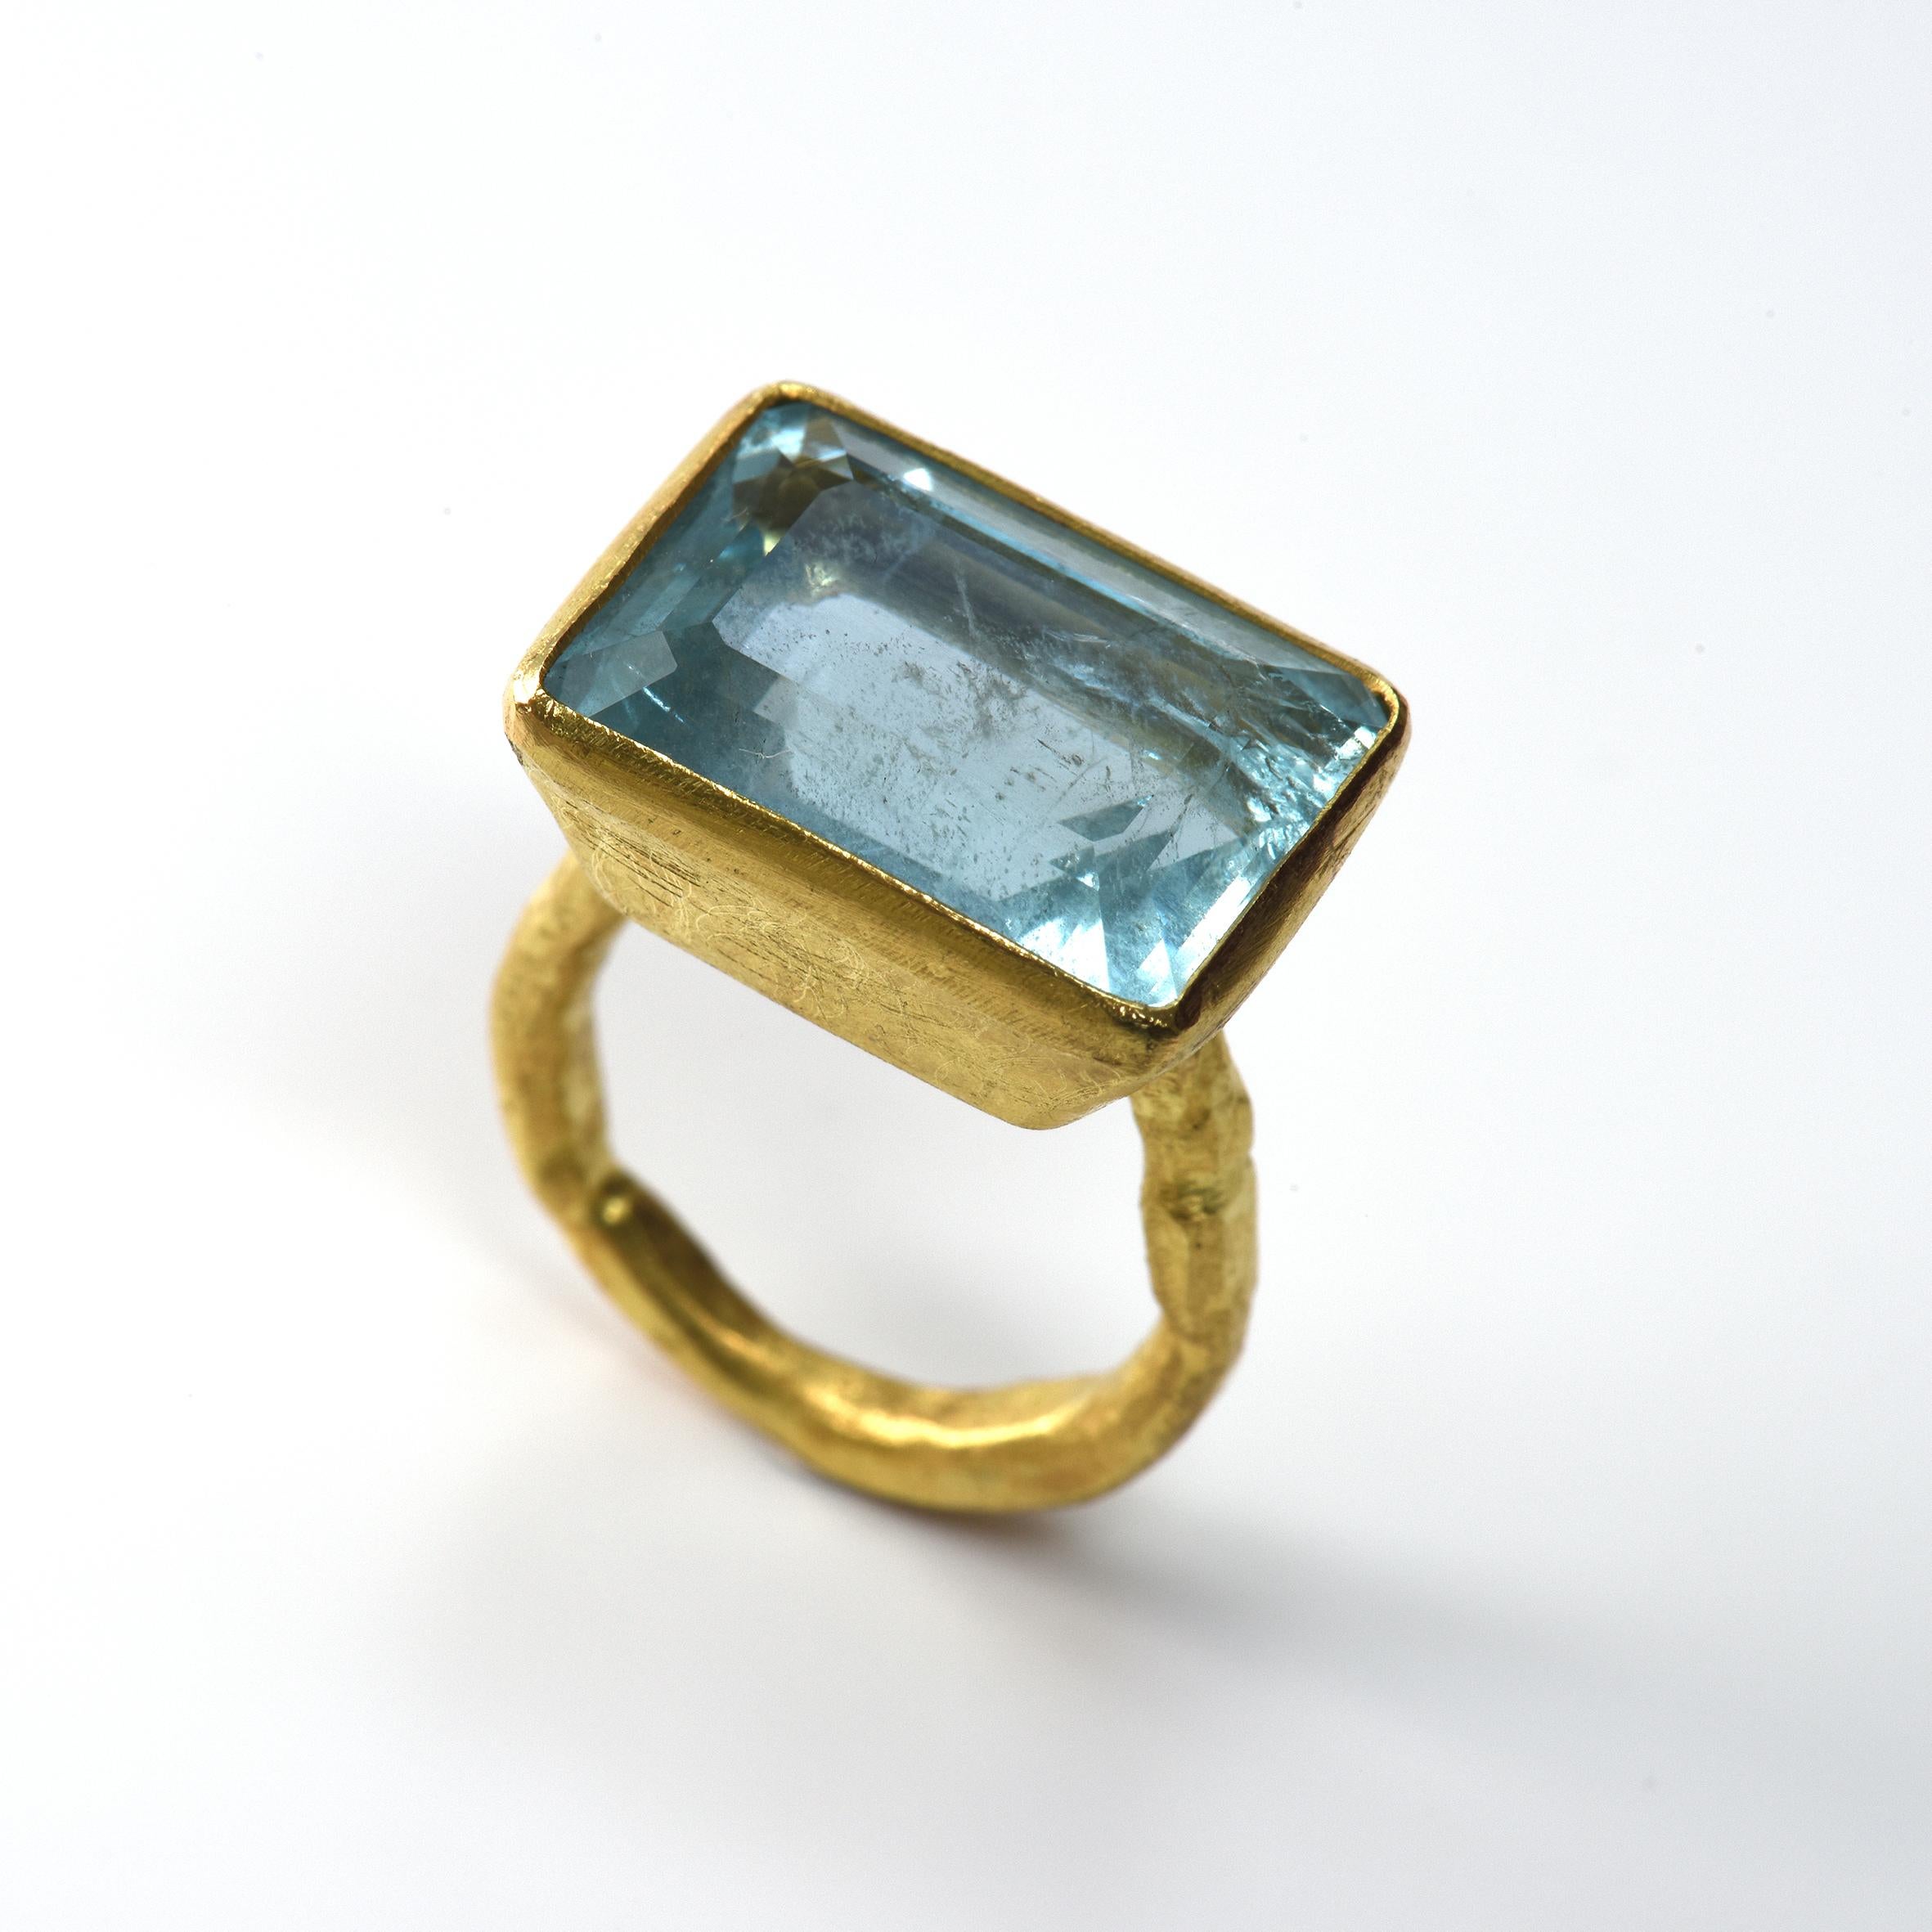 Large rectangular aquamarine, 13.68cts set in 18k yellow gold tapered rub-over setting on organic textured 18k yellow gold ring.

Disa Allsopp is an internationally renowned goldsmith based in London, UK. She is known for her use of colourful